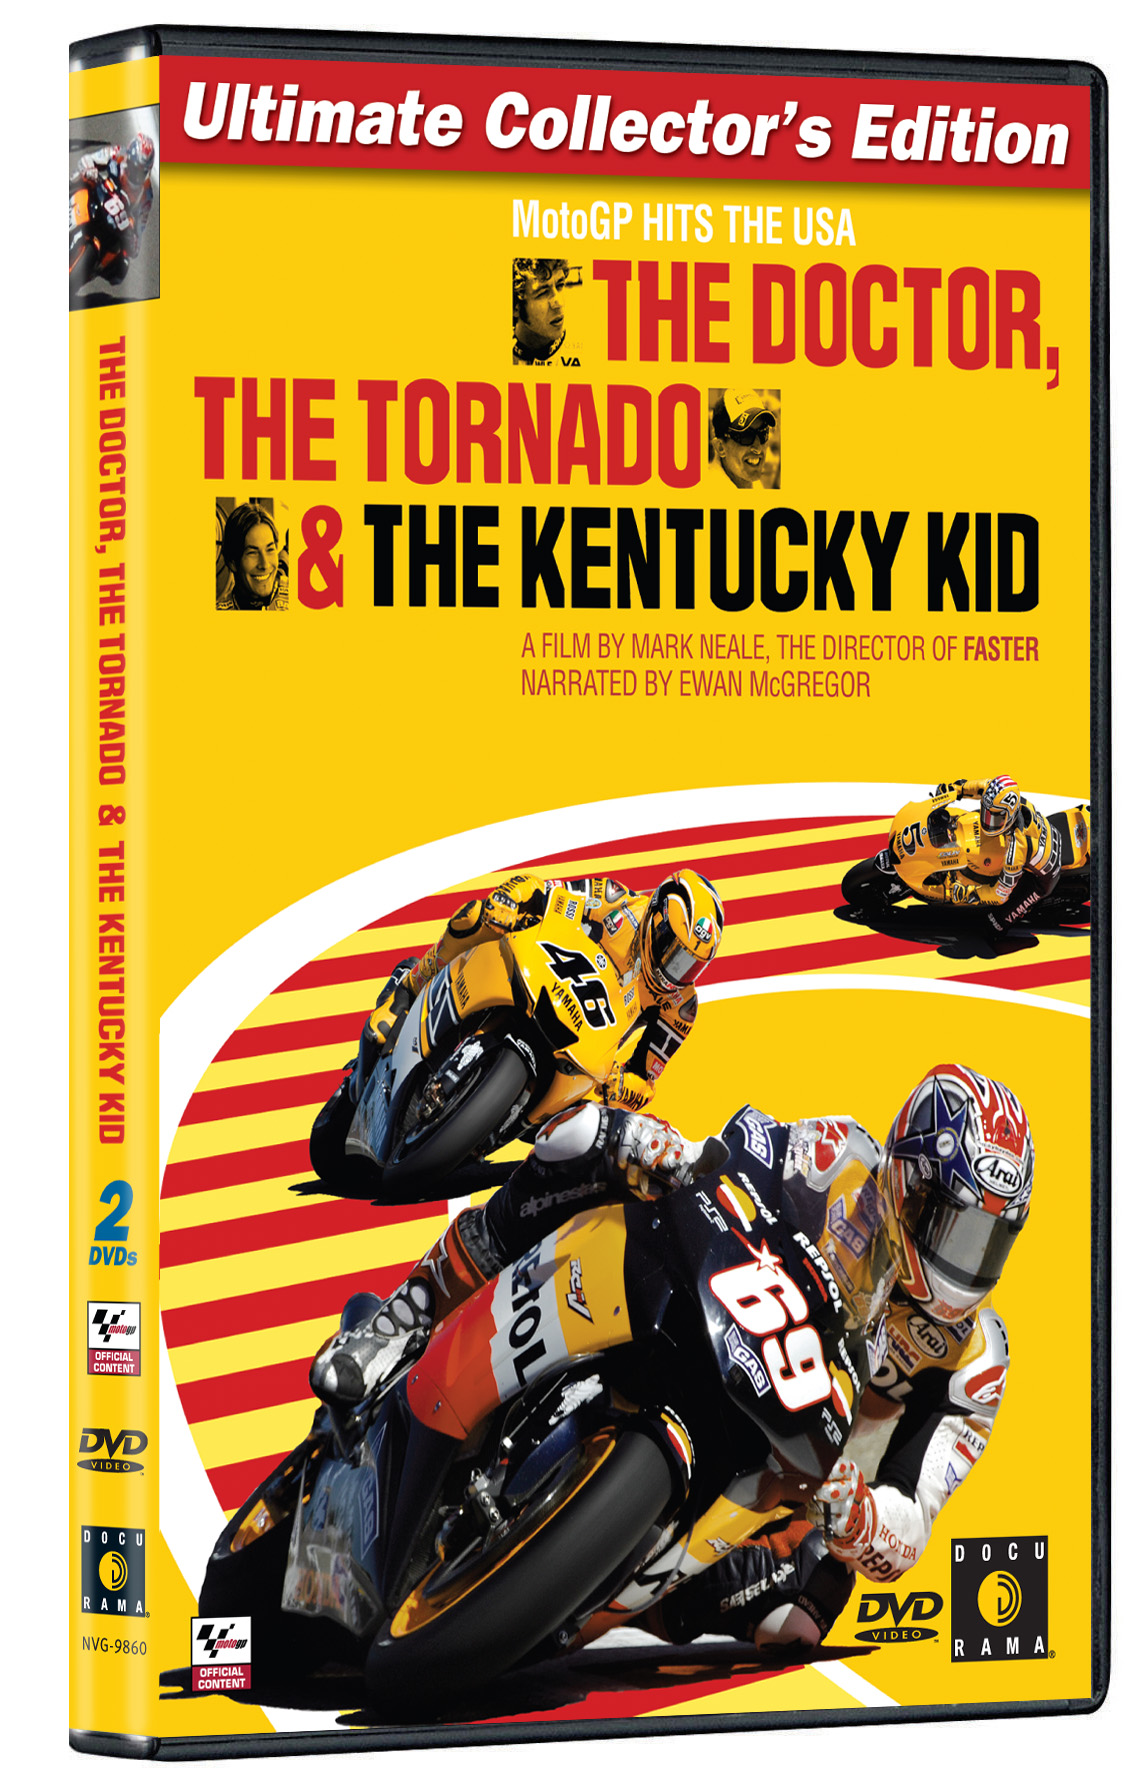 The Doctor, the Tornado and the Kentucky Kid